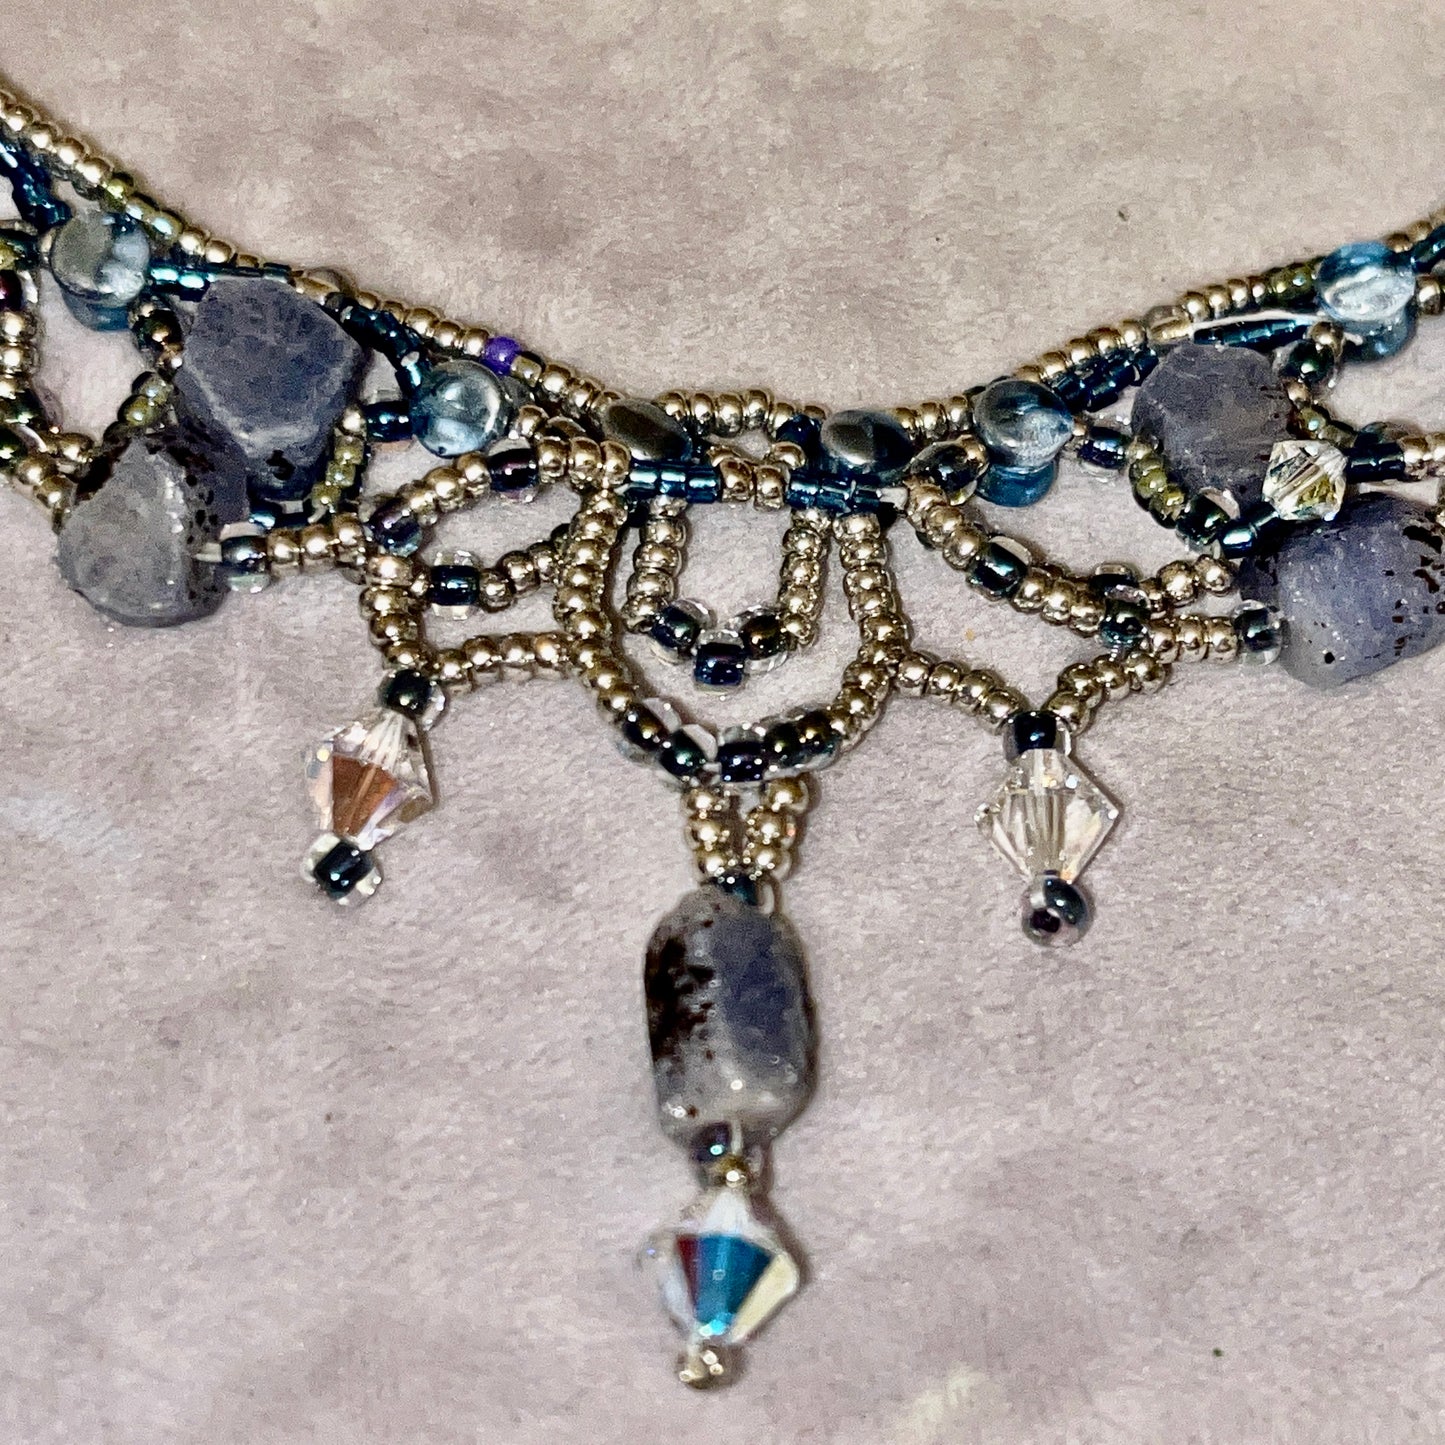 Edwardian style necklace with rough sapphires